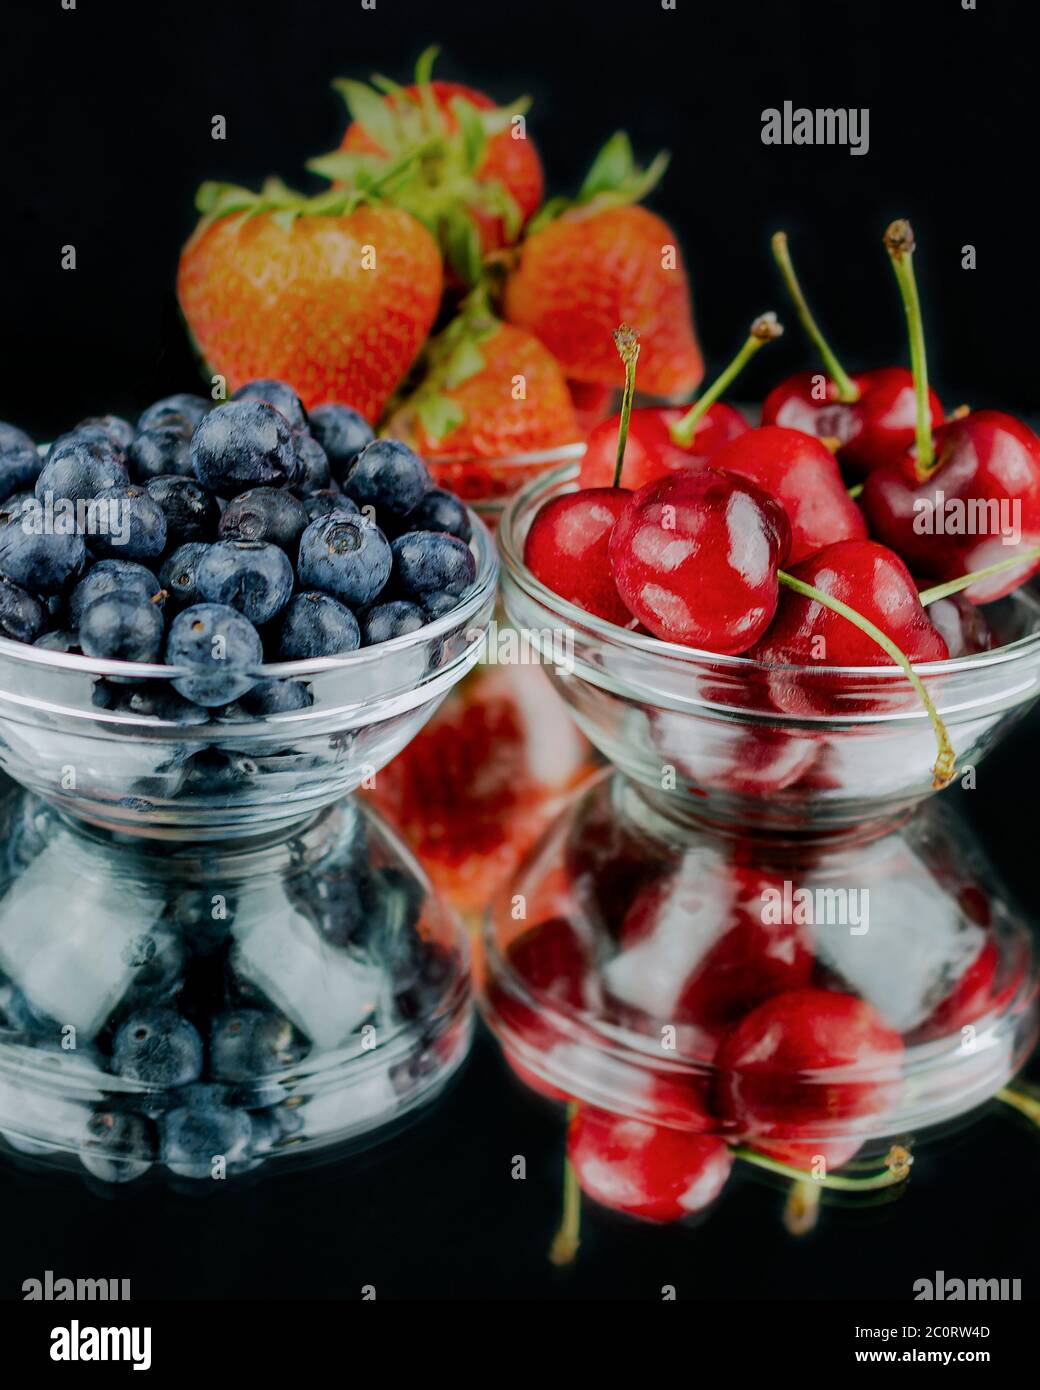 Three glass bowl filled with strawberries, cherries, and blueberries on a mirrow with reflection.  Black background. Stock Photo